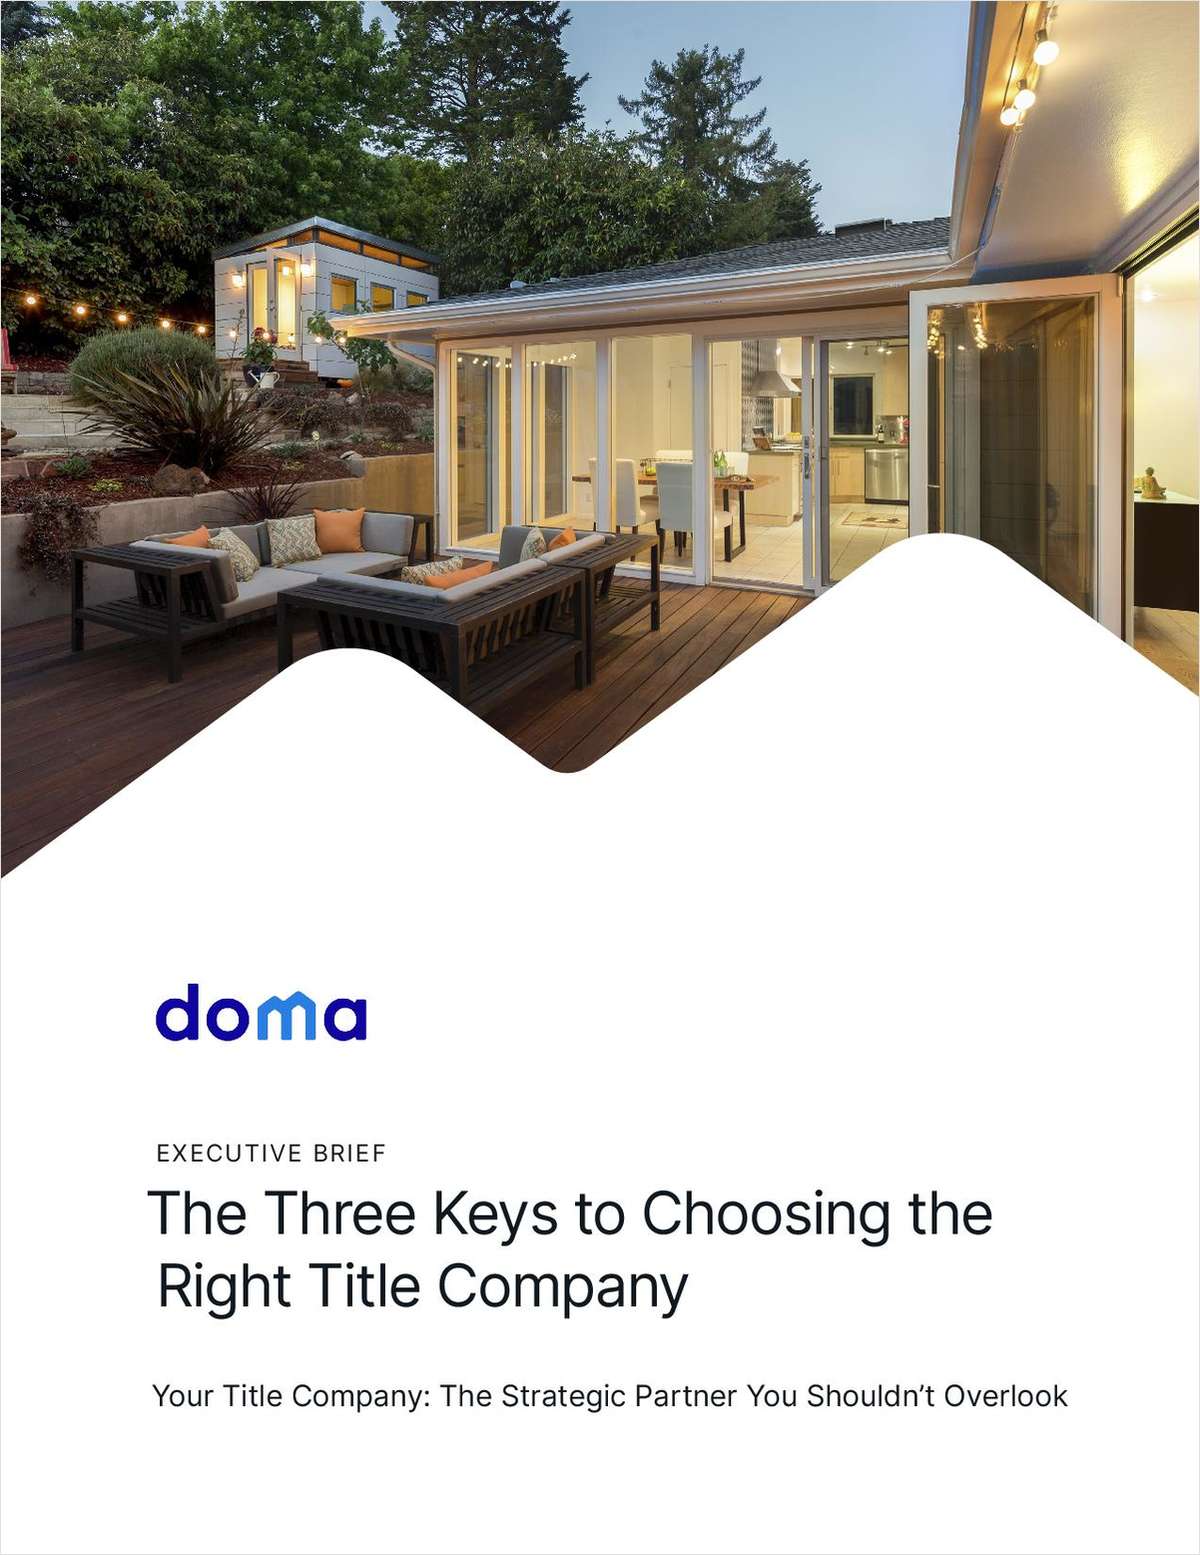 The Three Keys to Choosing the Right Title Company